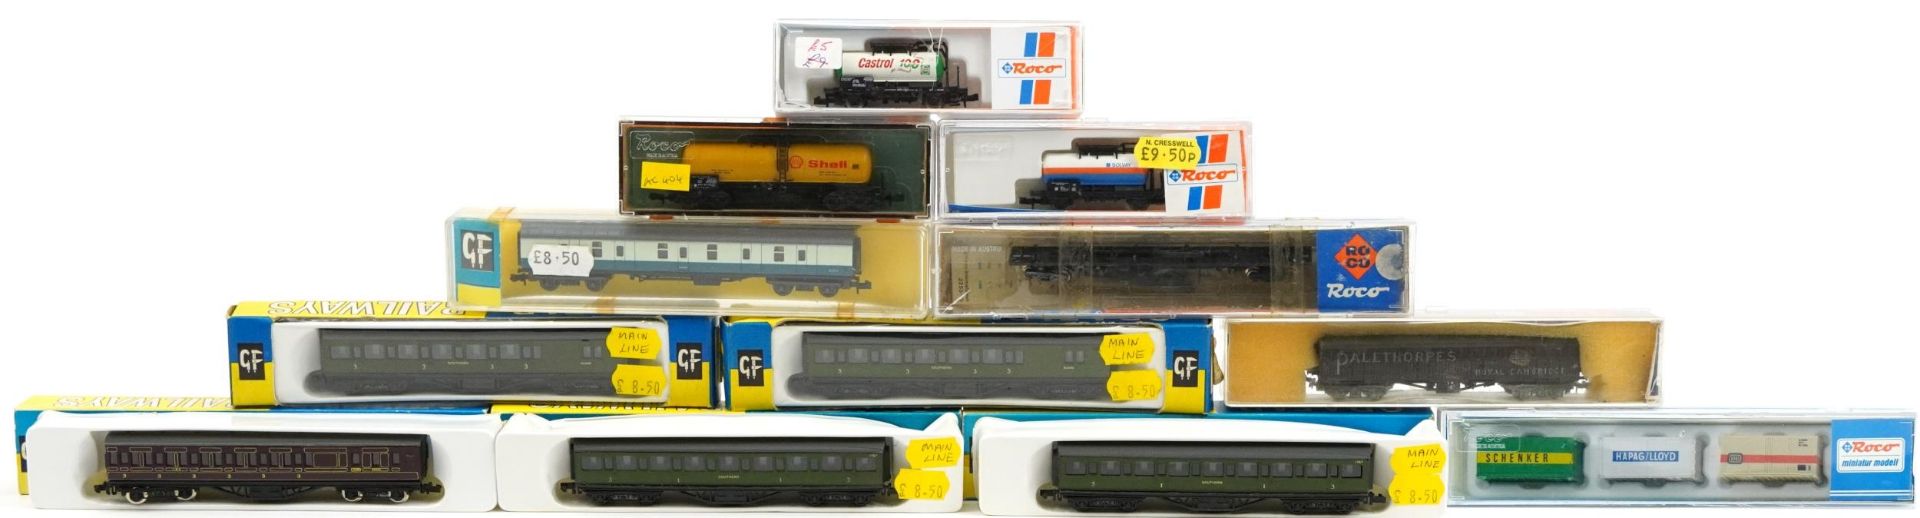 Twelve N gauge model railway carriages, tankers and wagons with boxes and cases including Graham